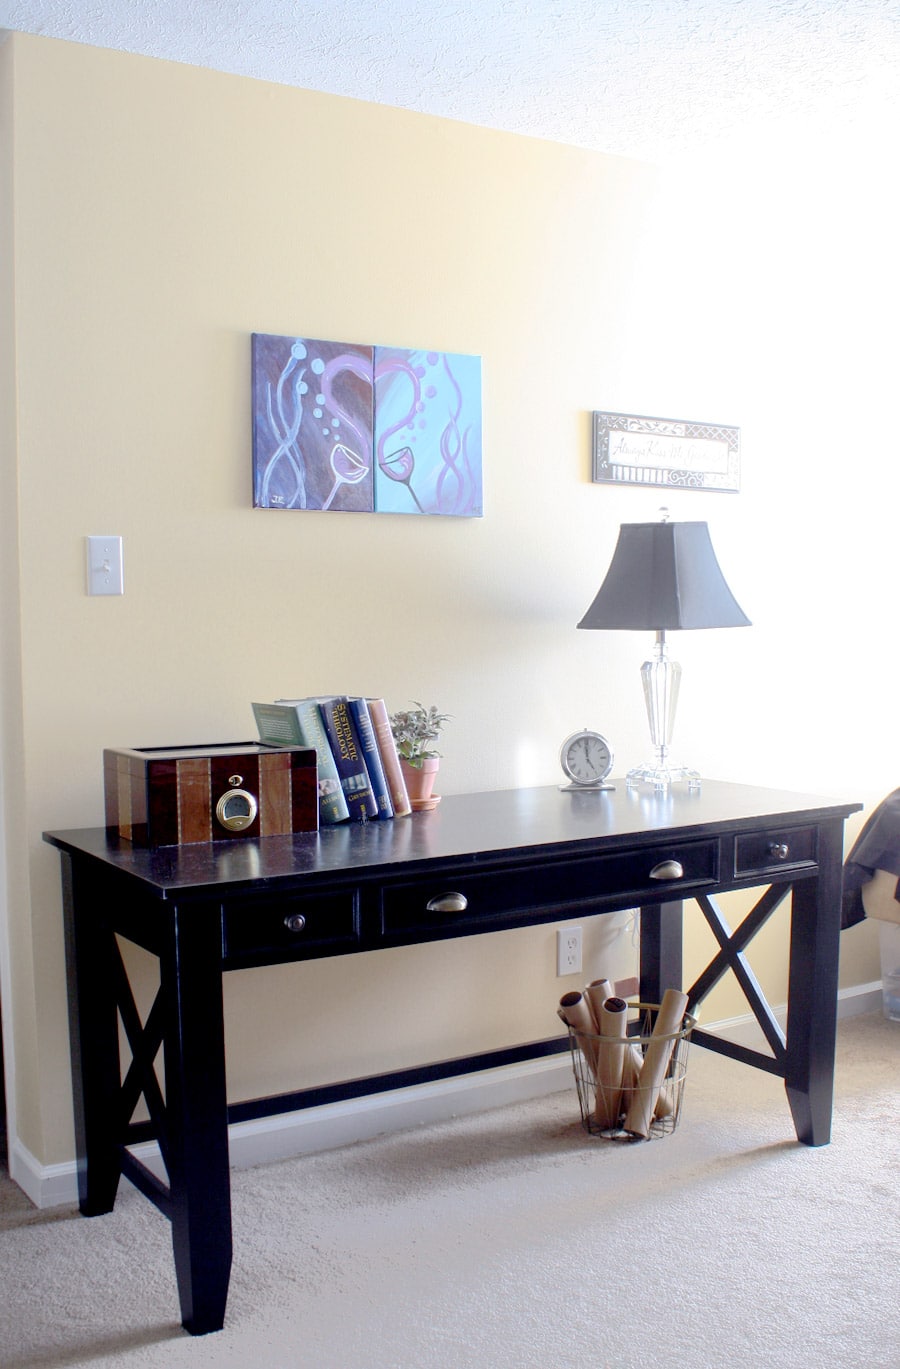 How to build a DIY writing desk. Free plans and tutorial!